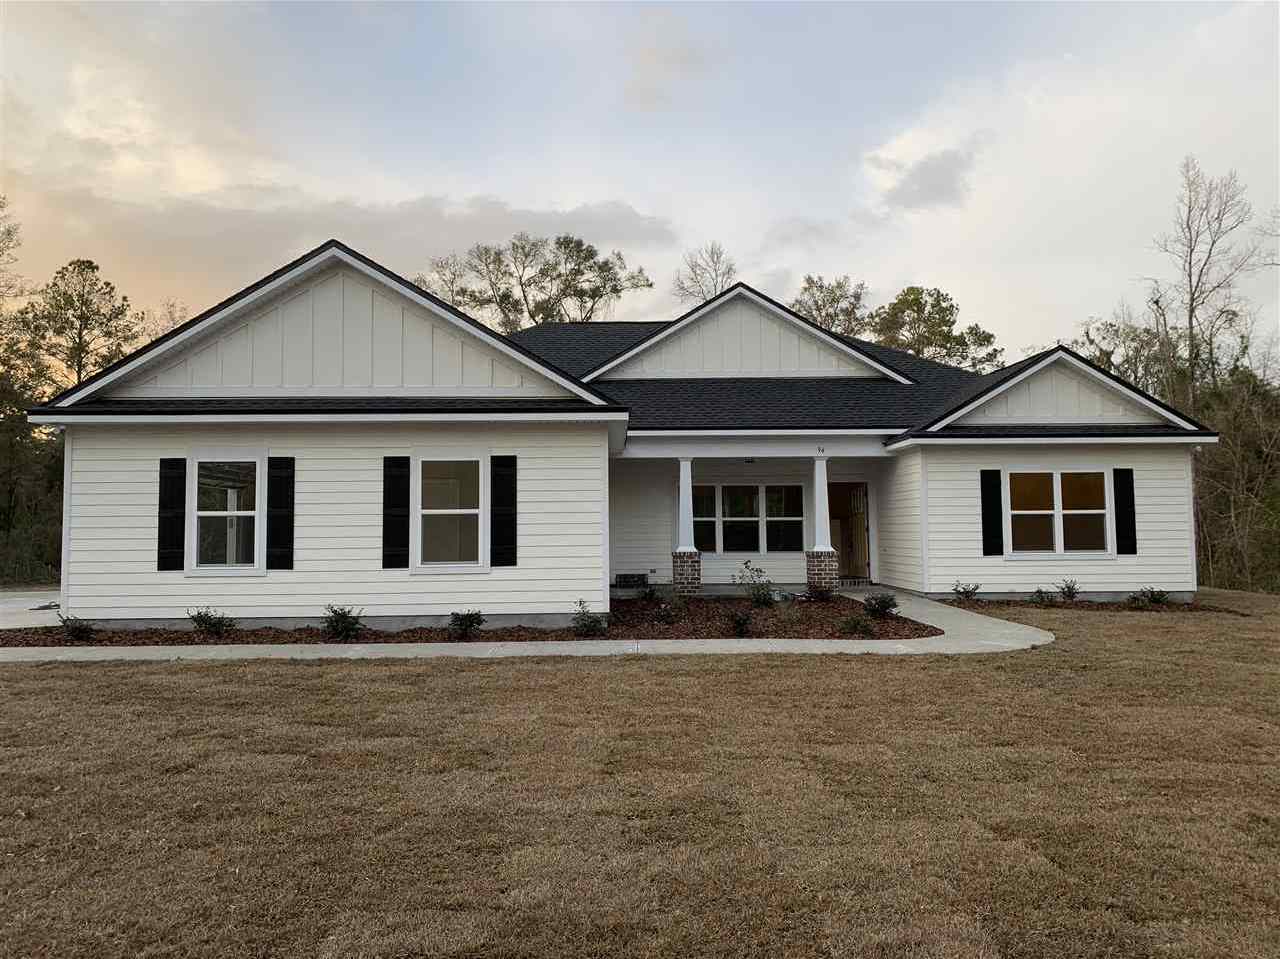 $348,000 - 4Br/2Ba -  for Sale in The Preserve At Wakulla Statio, Crawfordville